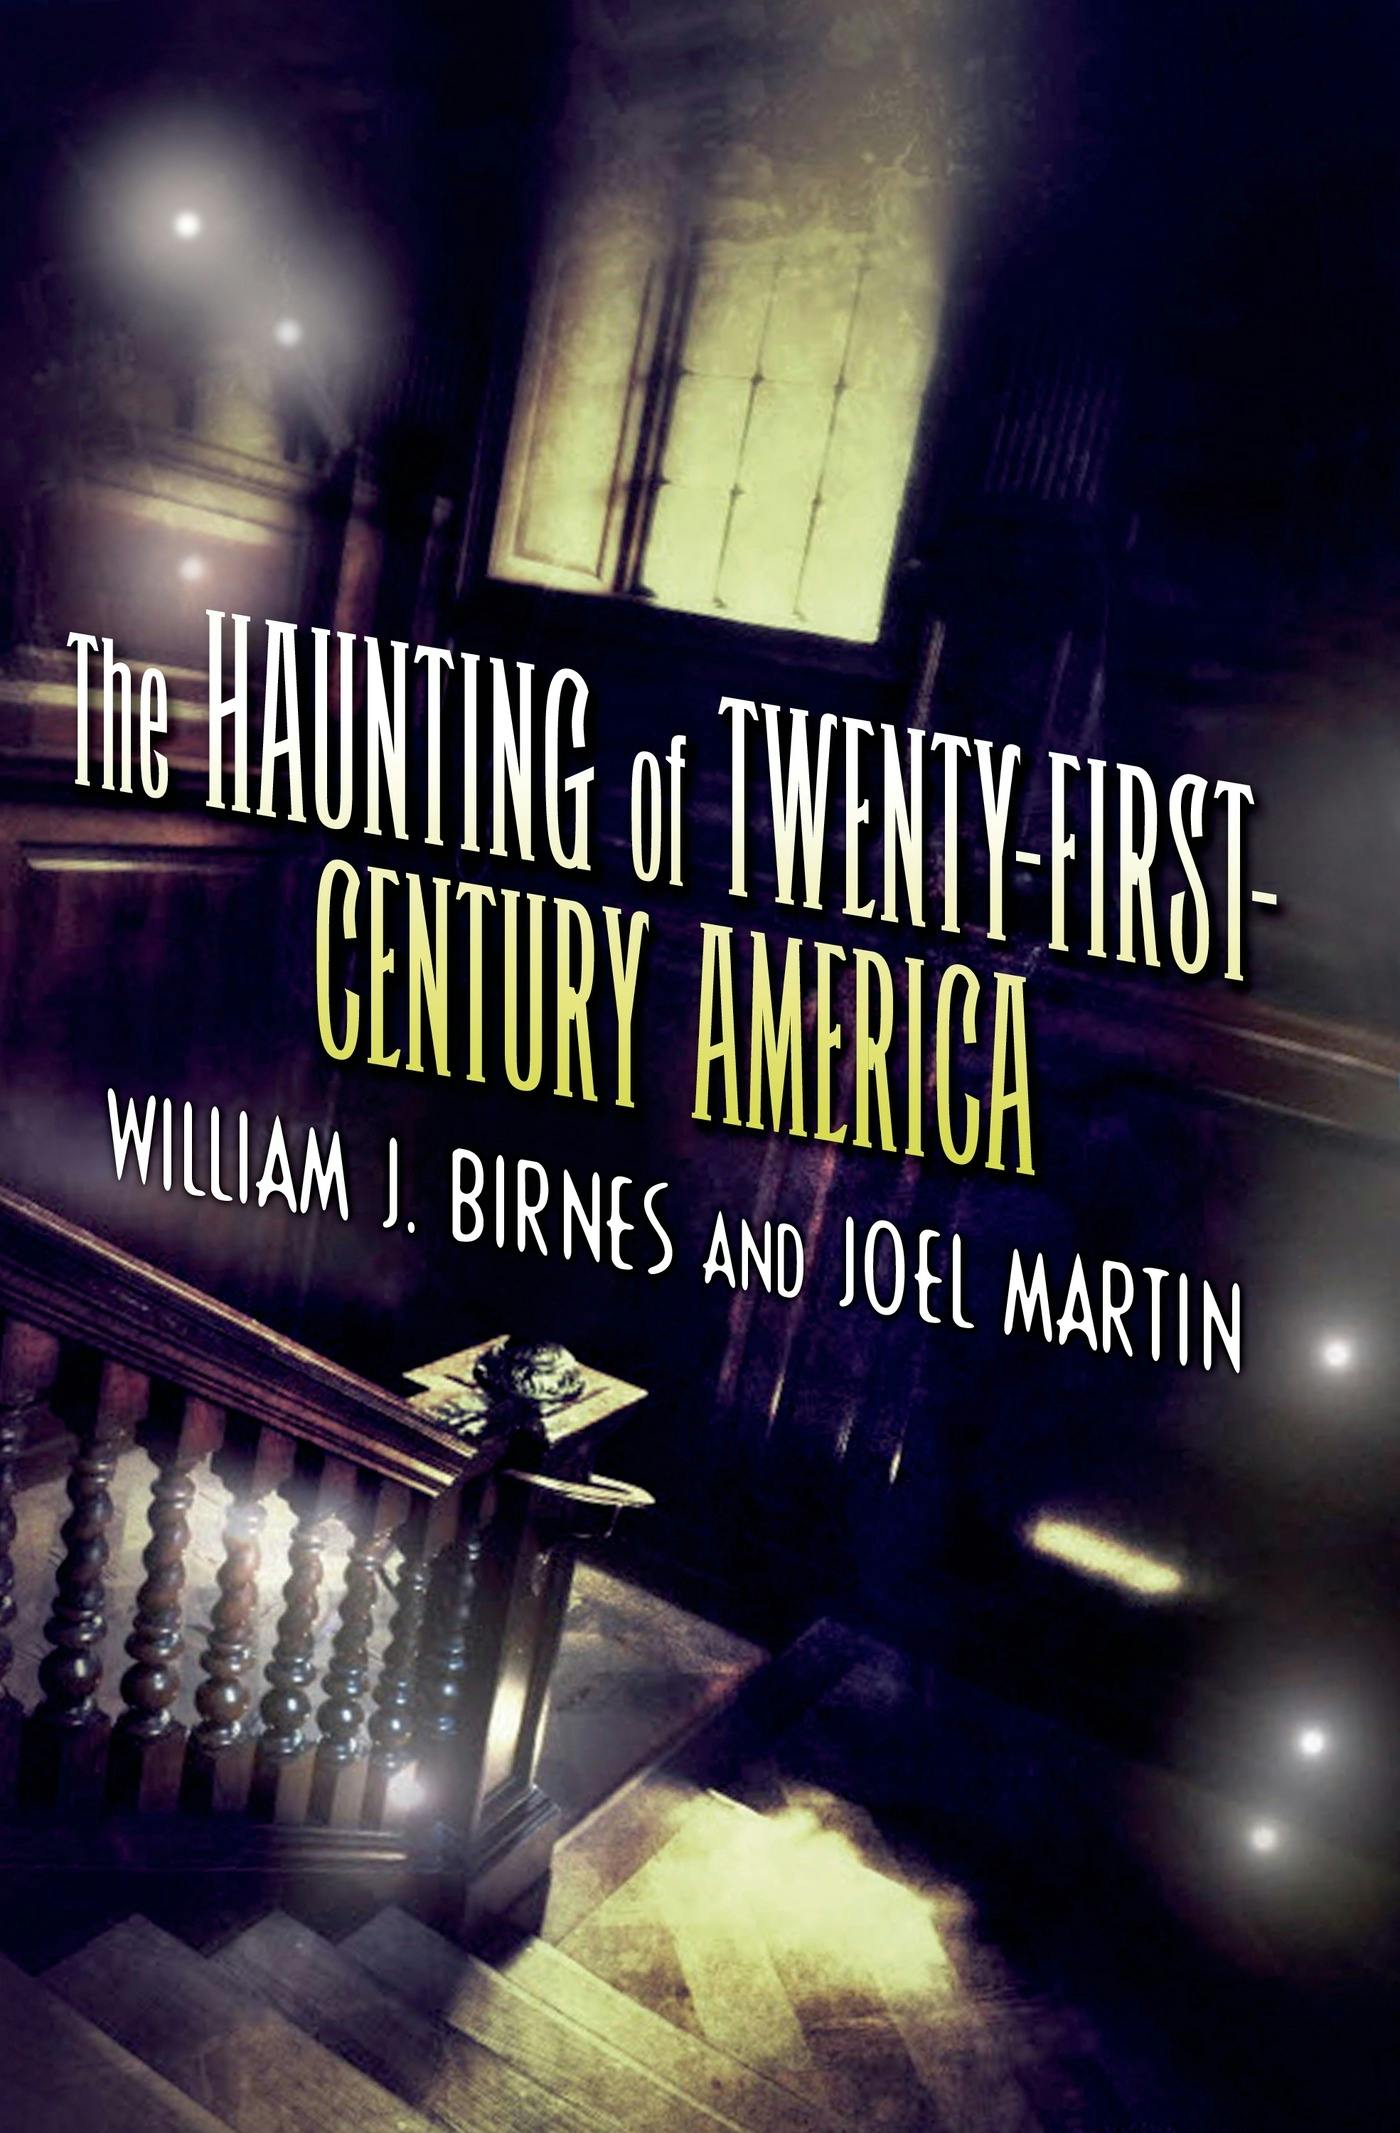 Cover for the book titled as: The Haunting of Twenty-First-Century America